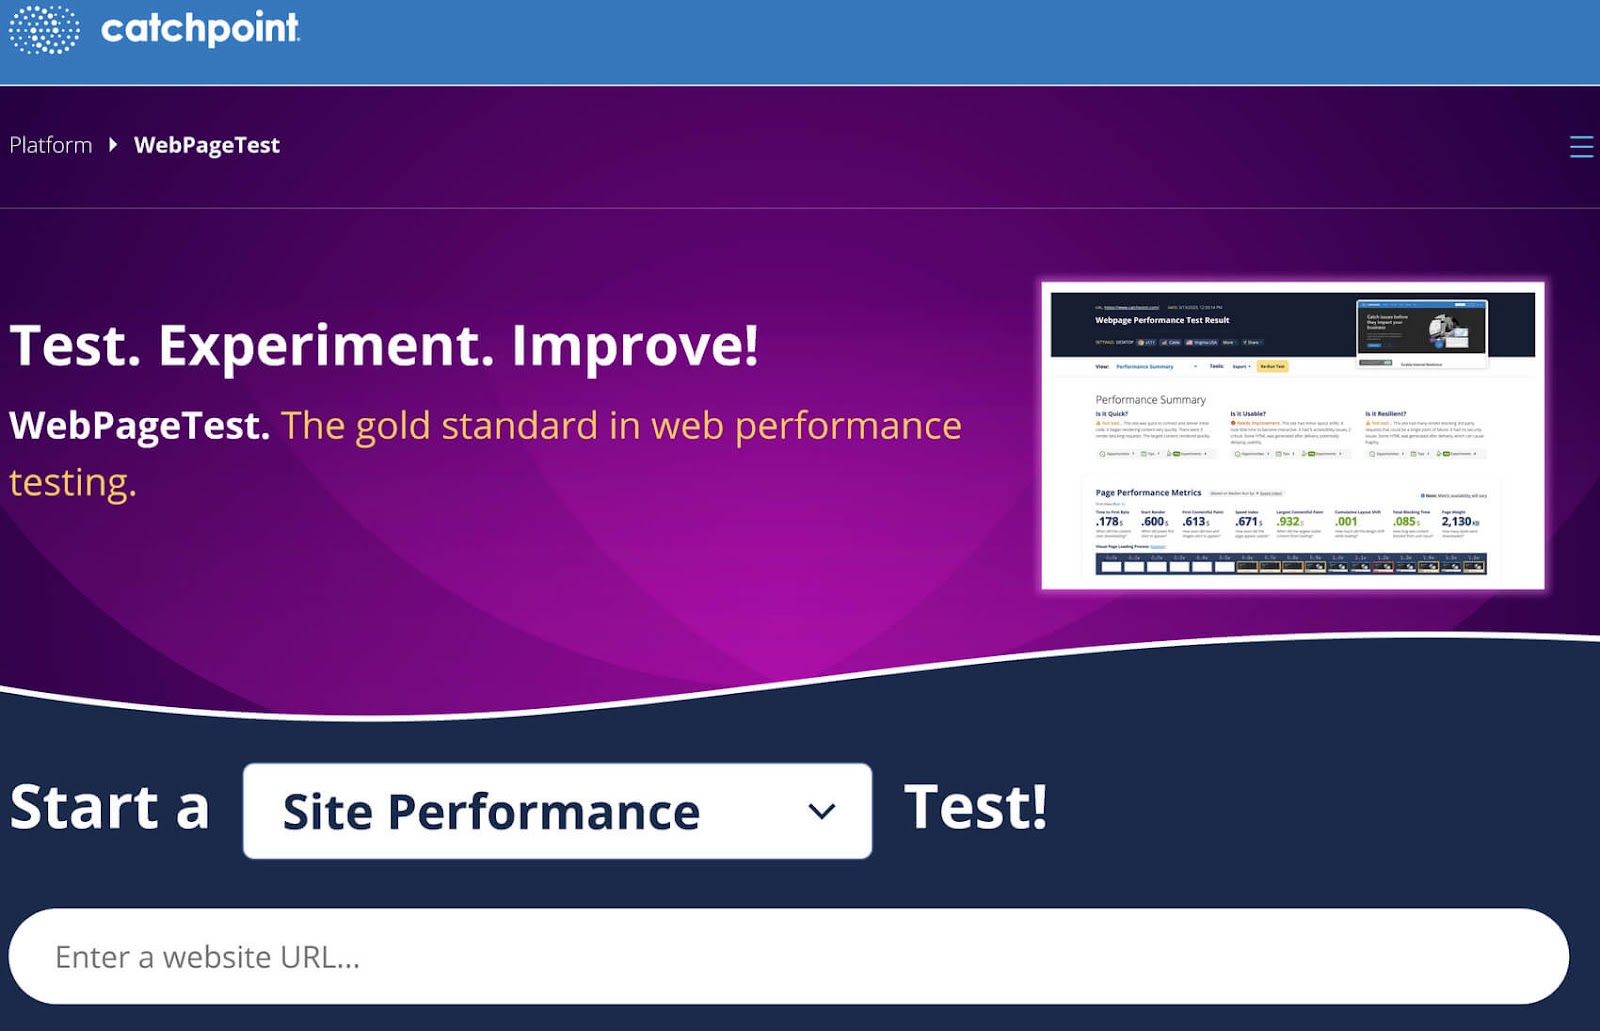 WebPageTest homepage showing a salient  "Start a Site Performance Test" fastener  and a tract  to participate  a website URL.